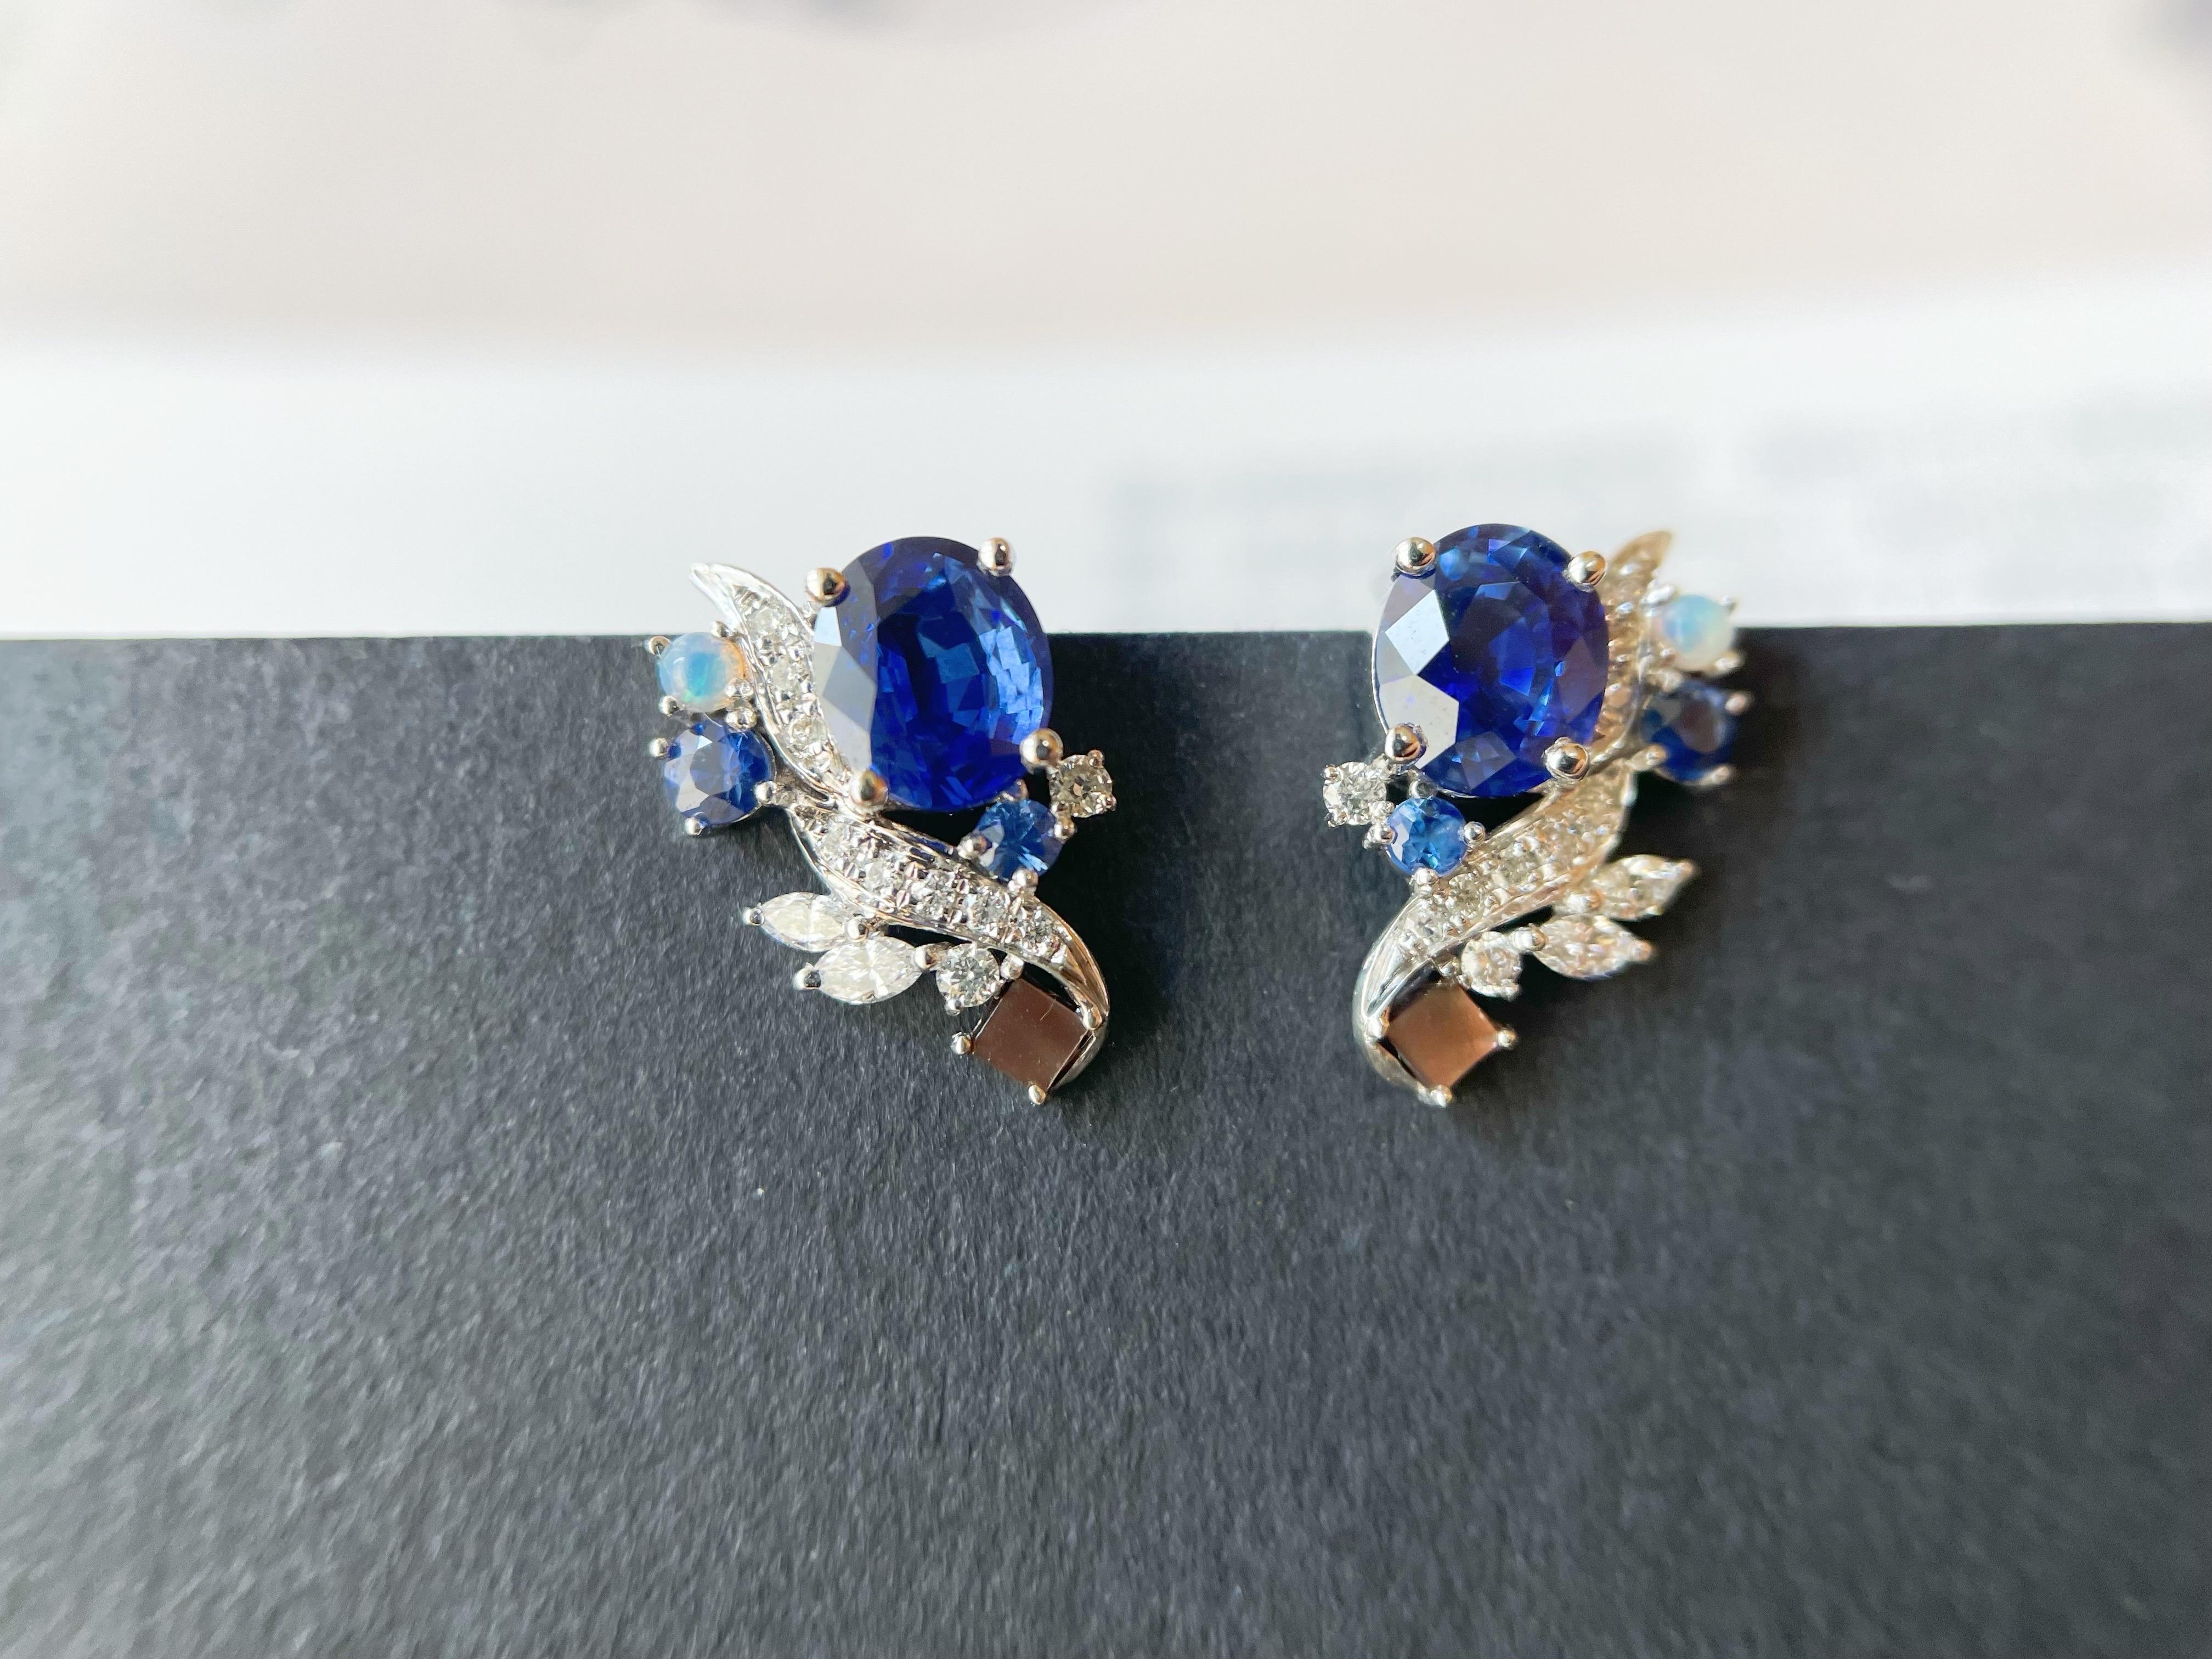 Two stunning natural Sri Lanka blue sapphires decorated by brilliant diamonds, opals, mother of pearls set in simple and modern design. The pair of earrings is custom-designed and is one-of-a-kind. The center natural sapphires are ethically mined in